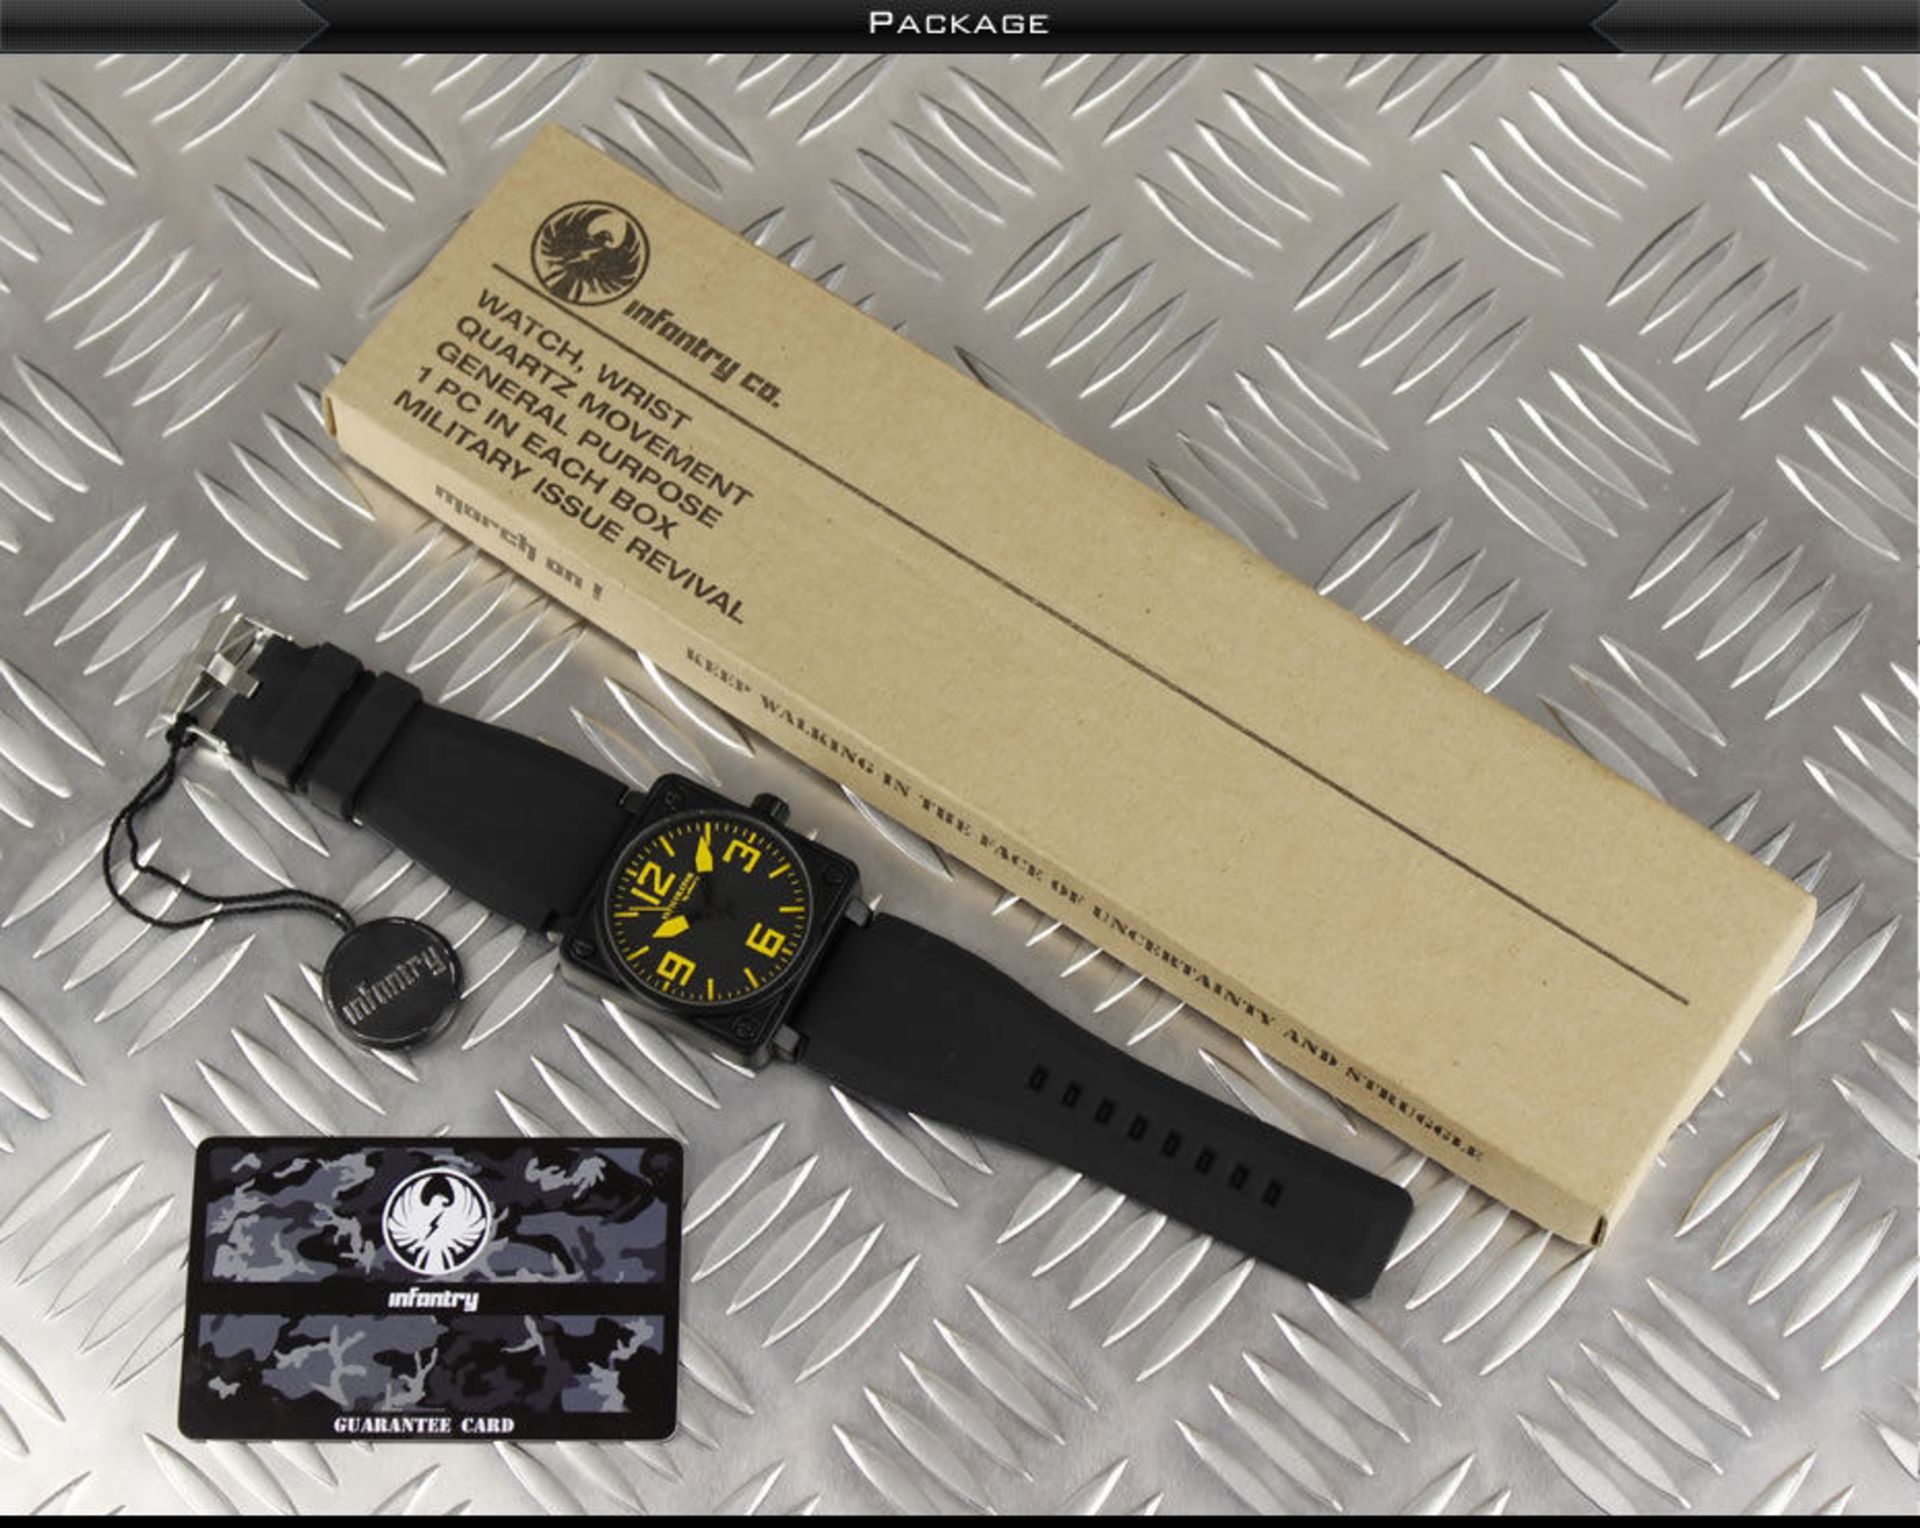 MEN'S INFANTRY WRIST WATCH BLACK FACE YELLOW DIALS RUBBER STRAP, BRAND NEW IN BOX *PLUS VAT* - Image 9 of 9